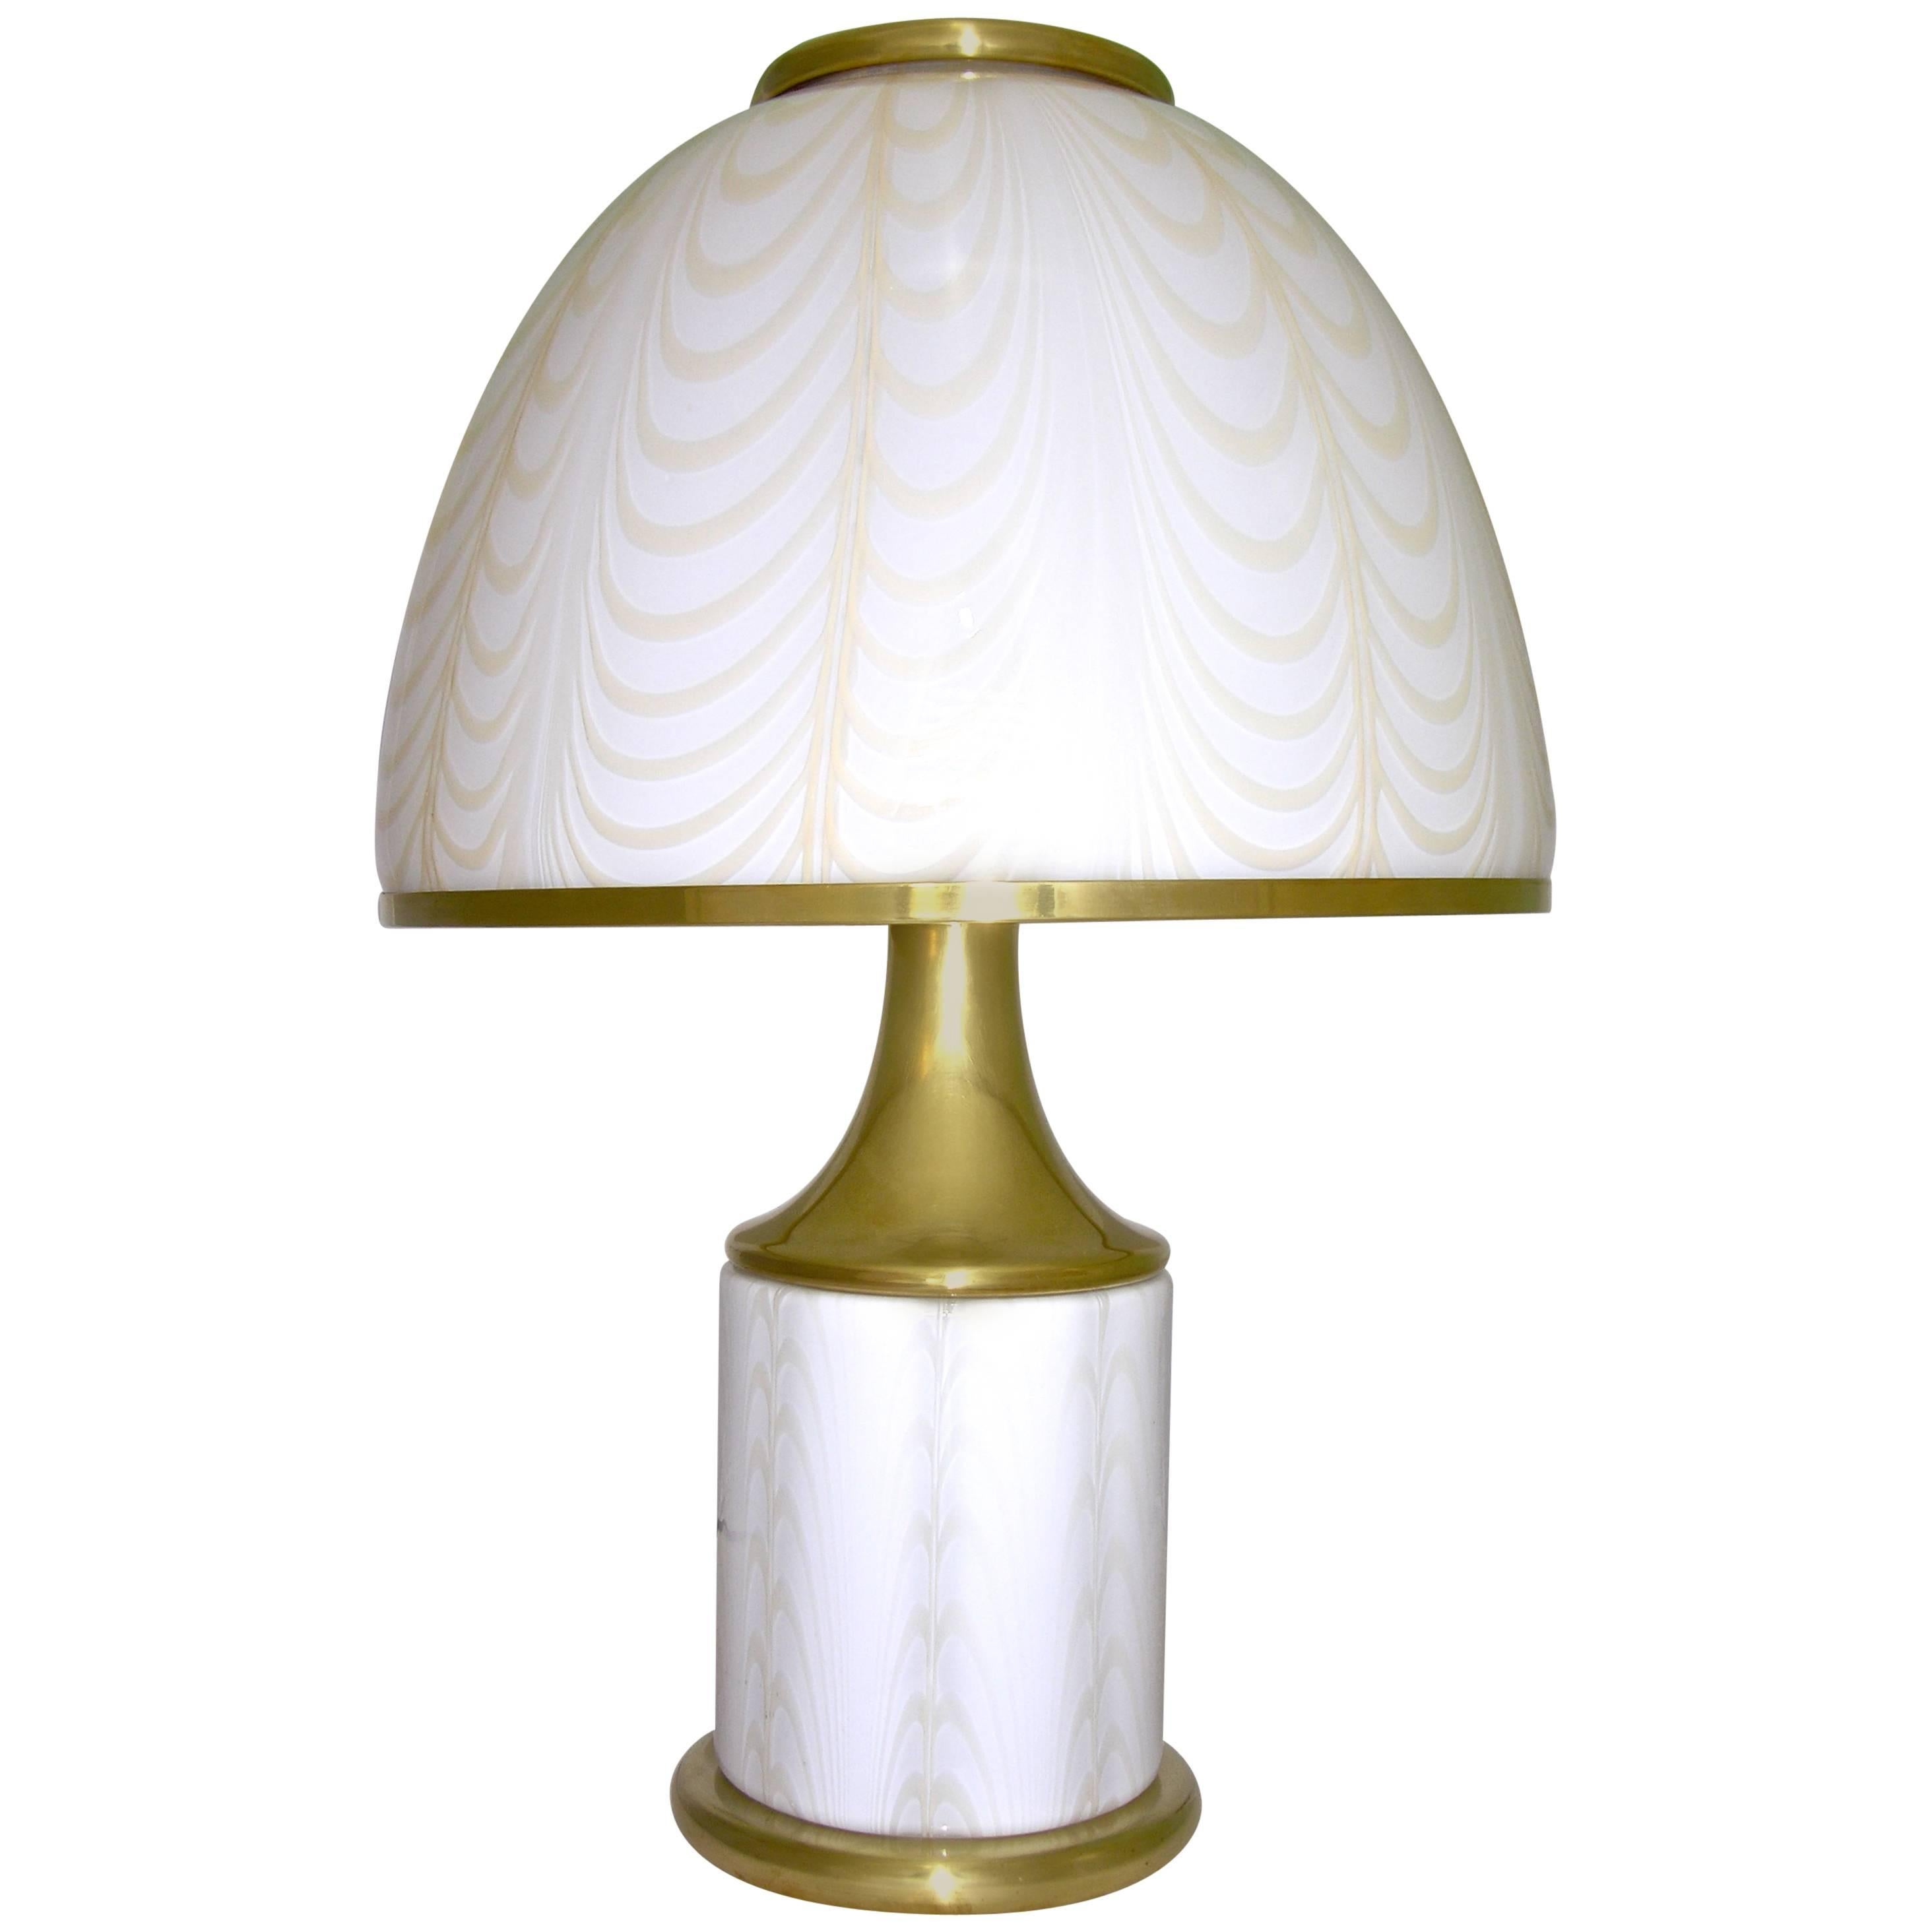 1970s Fabbian by Mazzega Double Lit White and Gold Glass Round Table Lamp